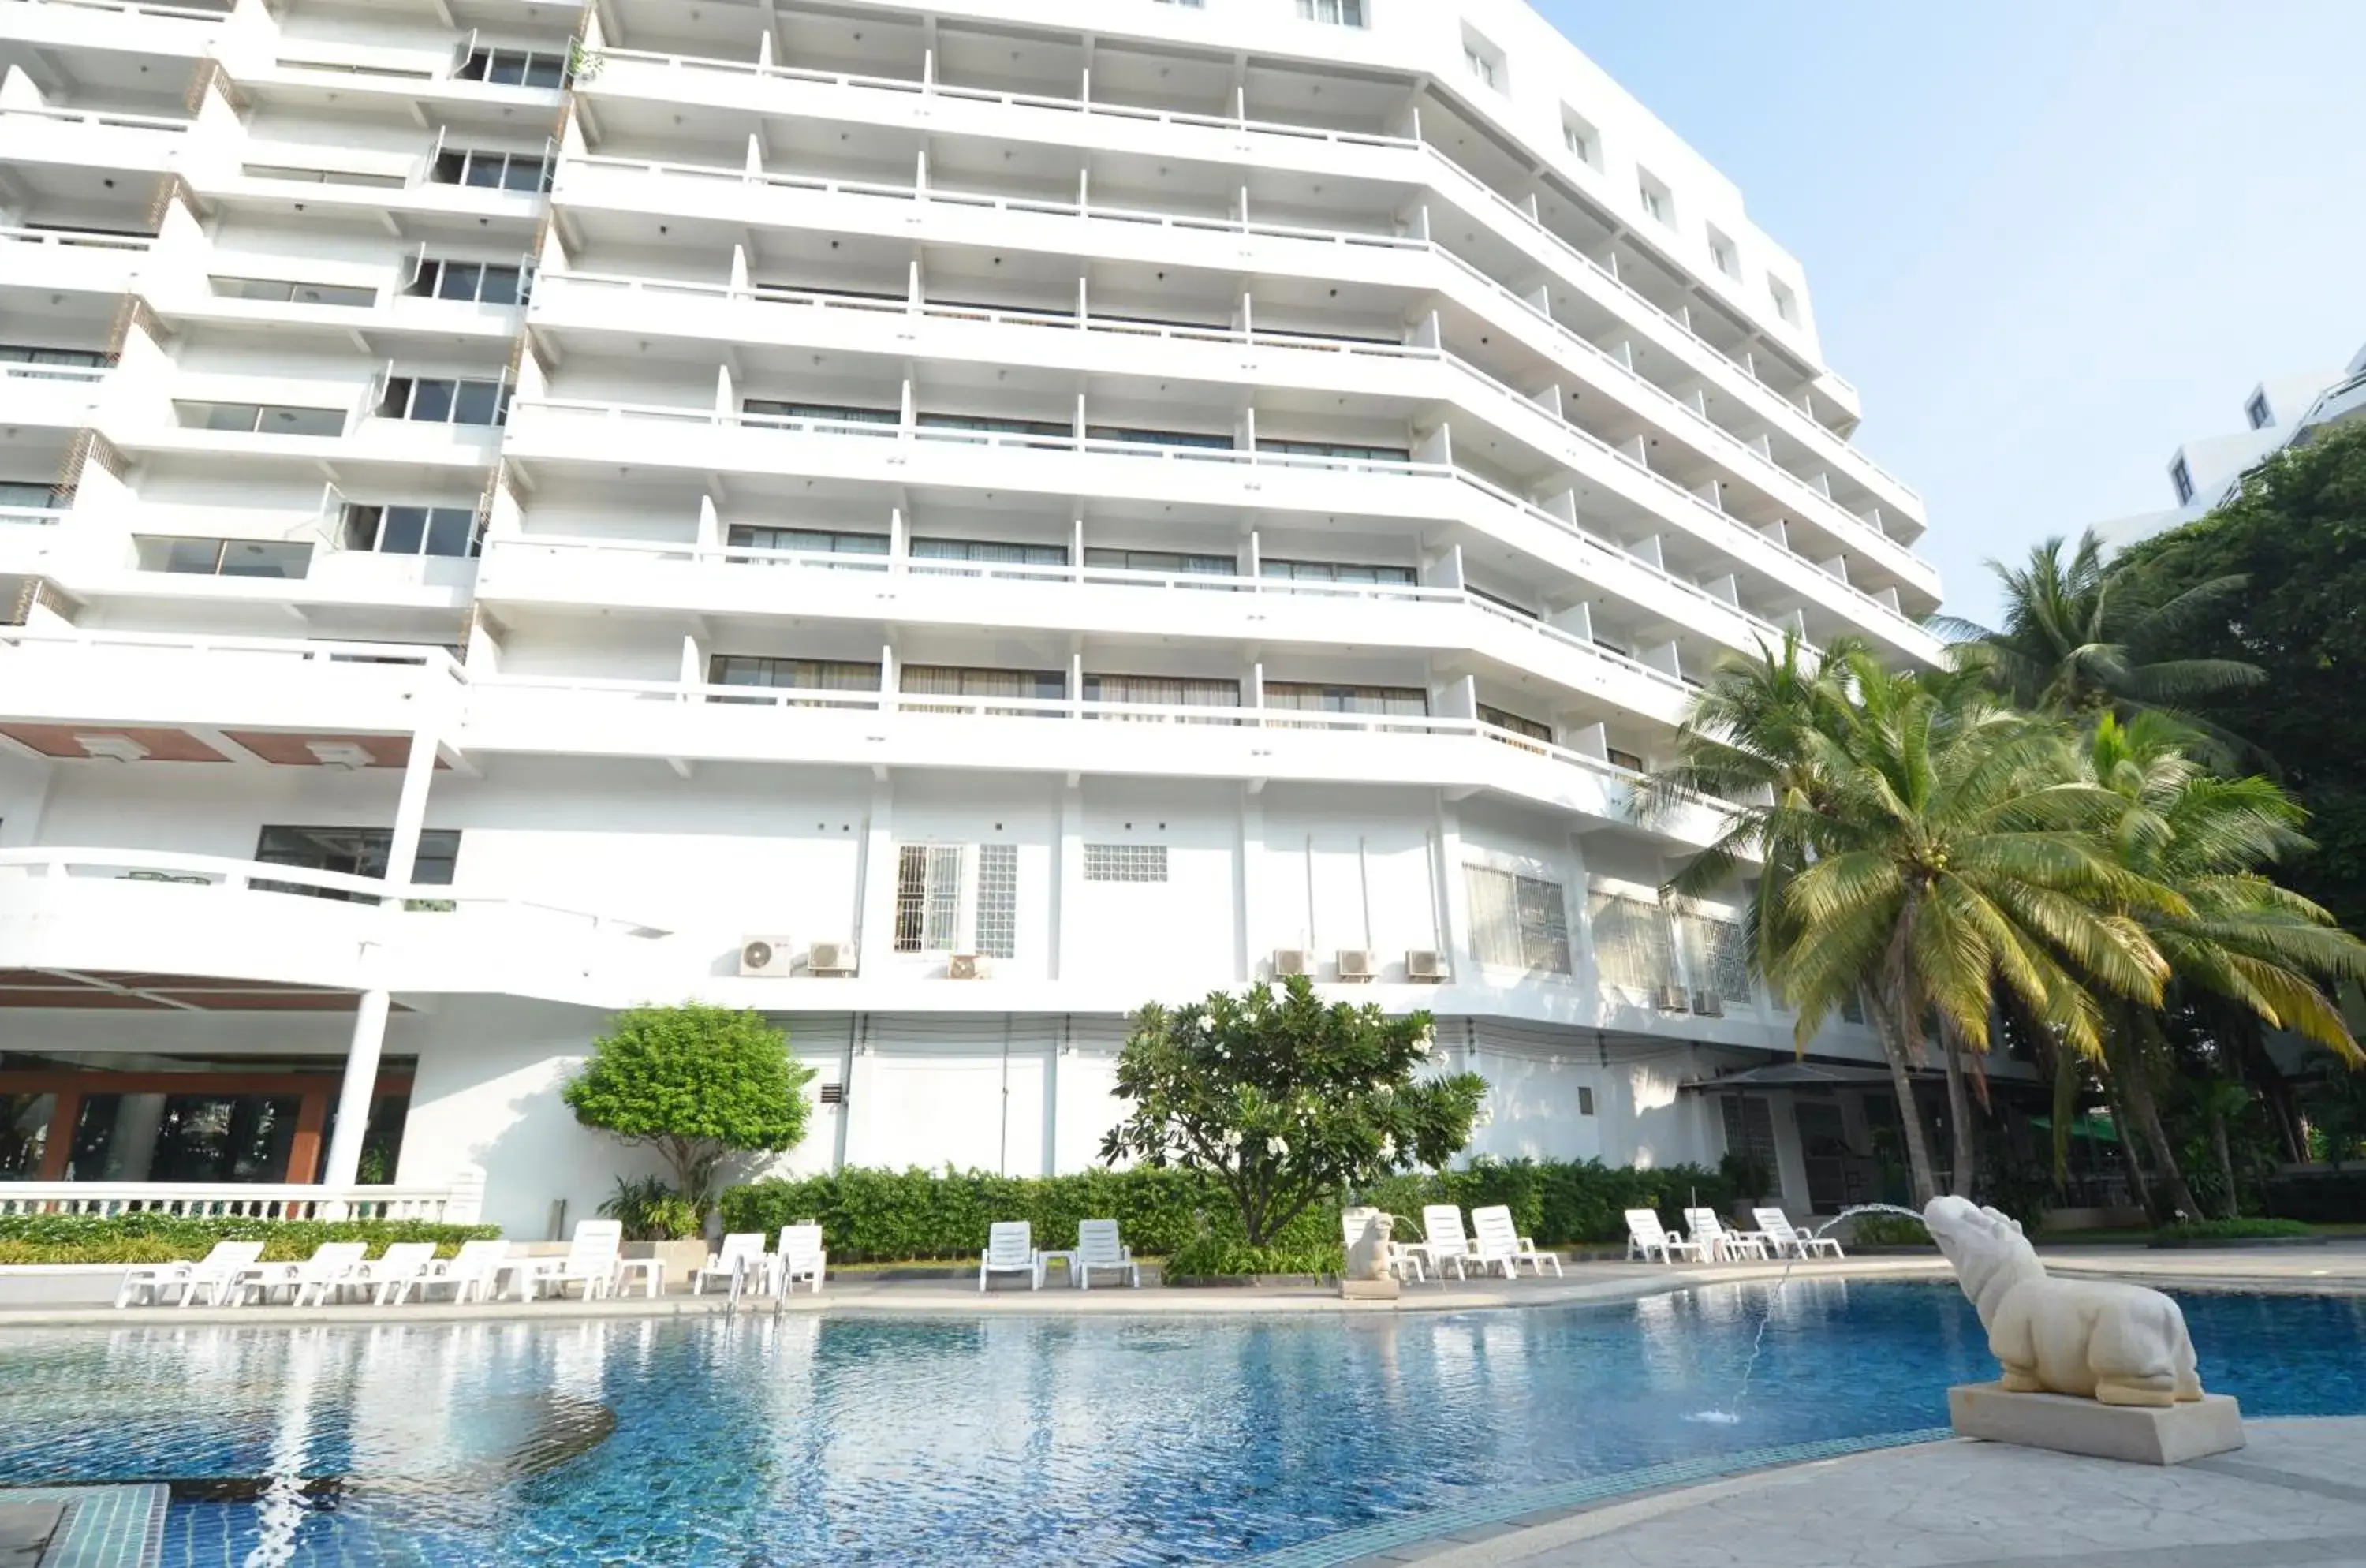 Property building, Swimming Pool in Welcome Plaza Hotel Pattaya